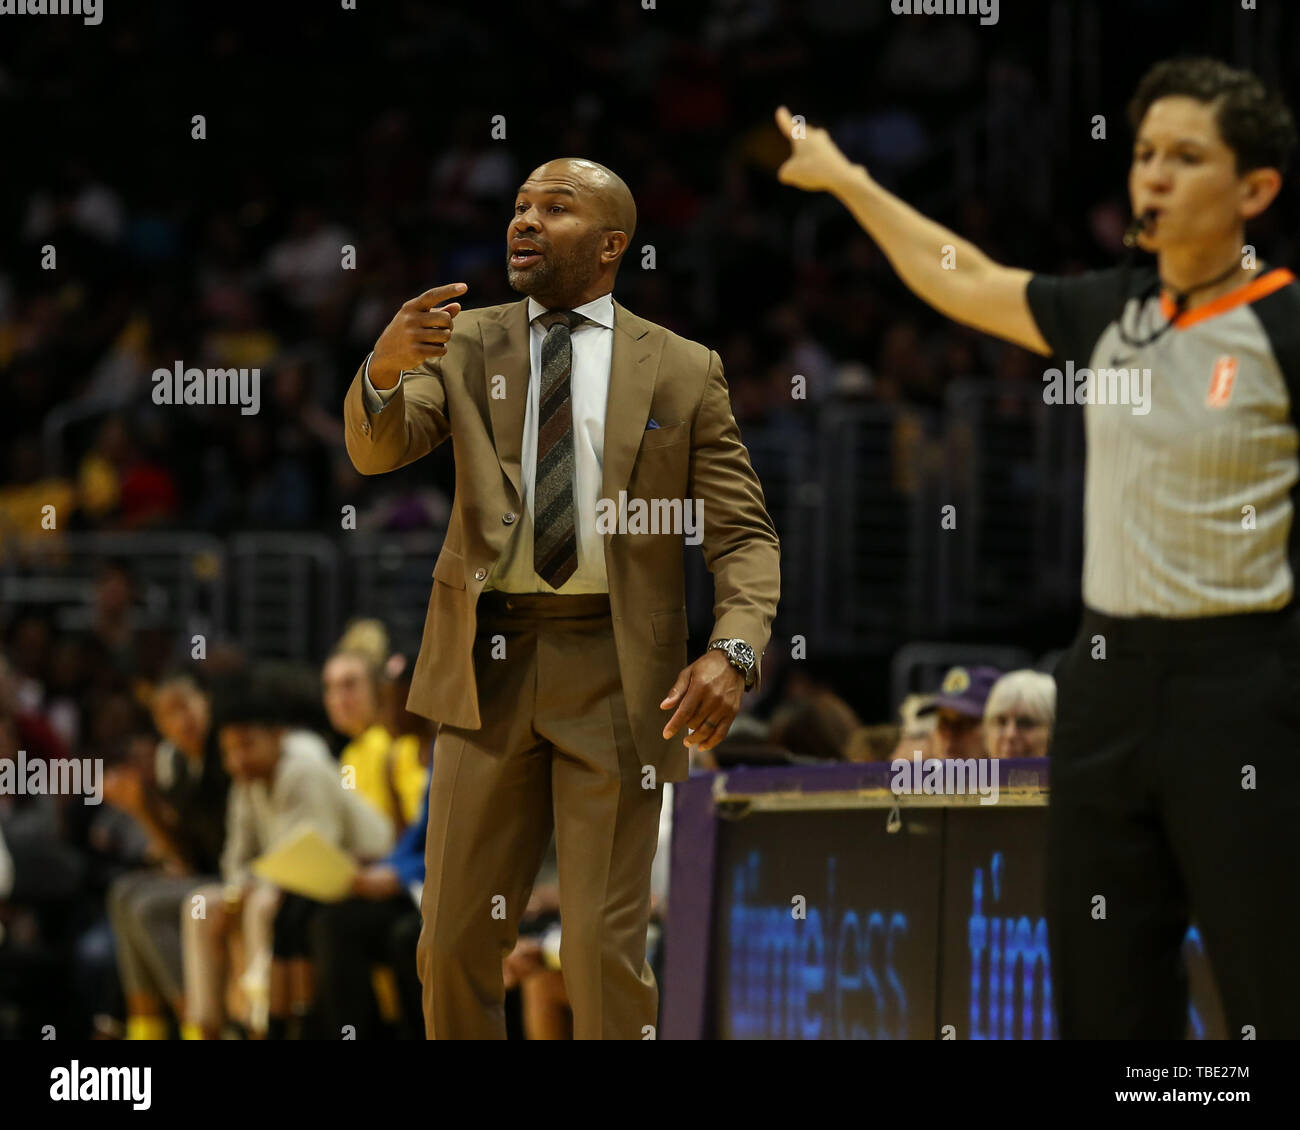 Los Angeles Sparks Derek Fisher during the Connecticut Sun vs Los Angeles Sparks game at Staples Center in Los Angeles, Ca on May 31, 2019. (Photo by Jevone Moore) Stock Photo